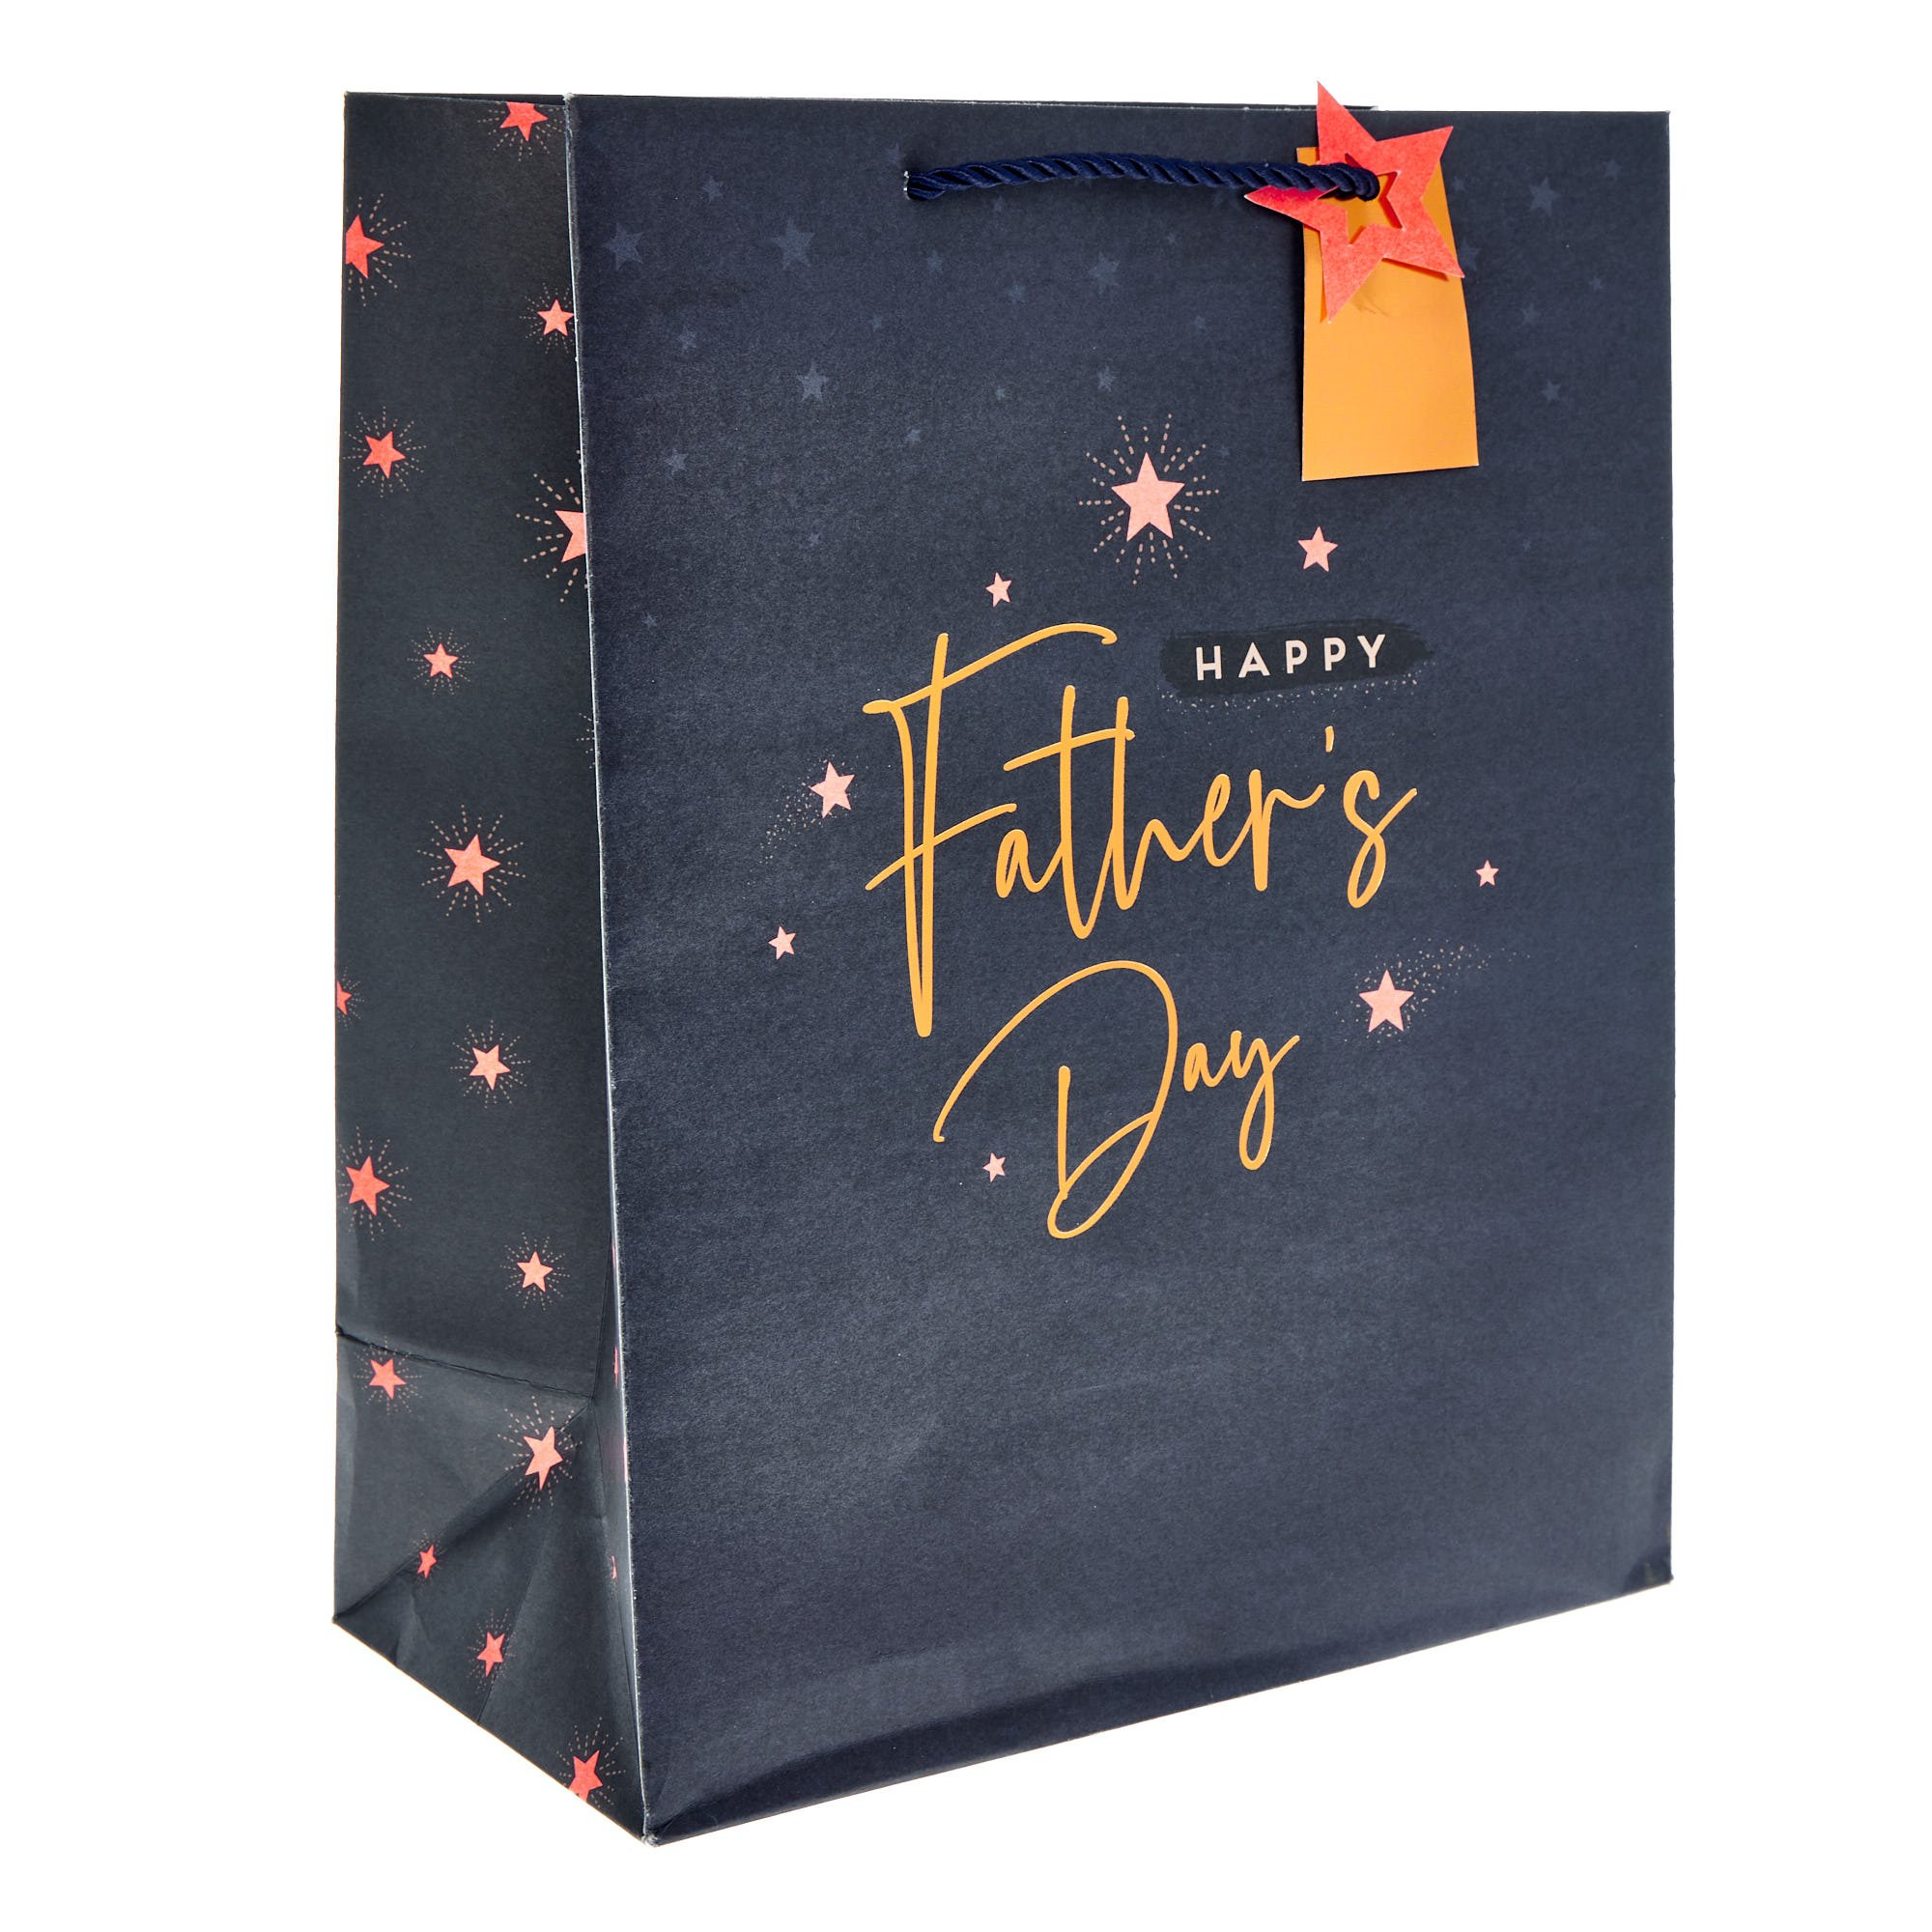 Only Fools & Horses Father's Day Gift Bundle